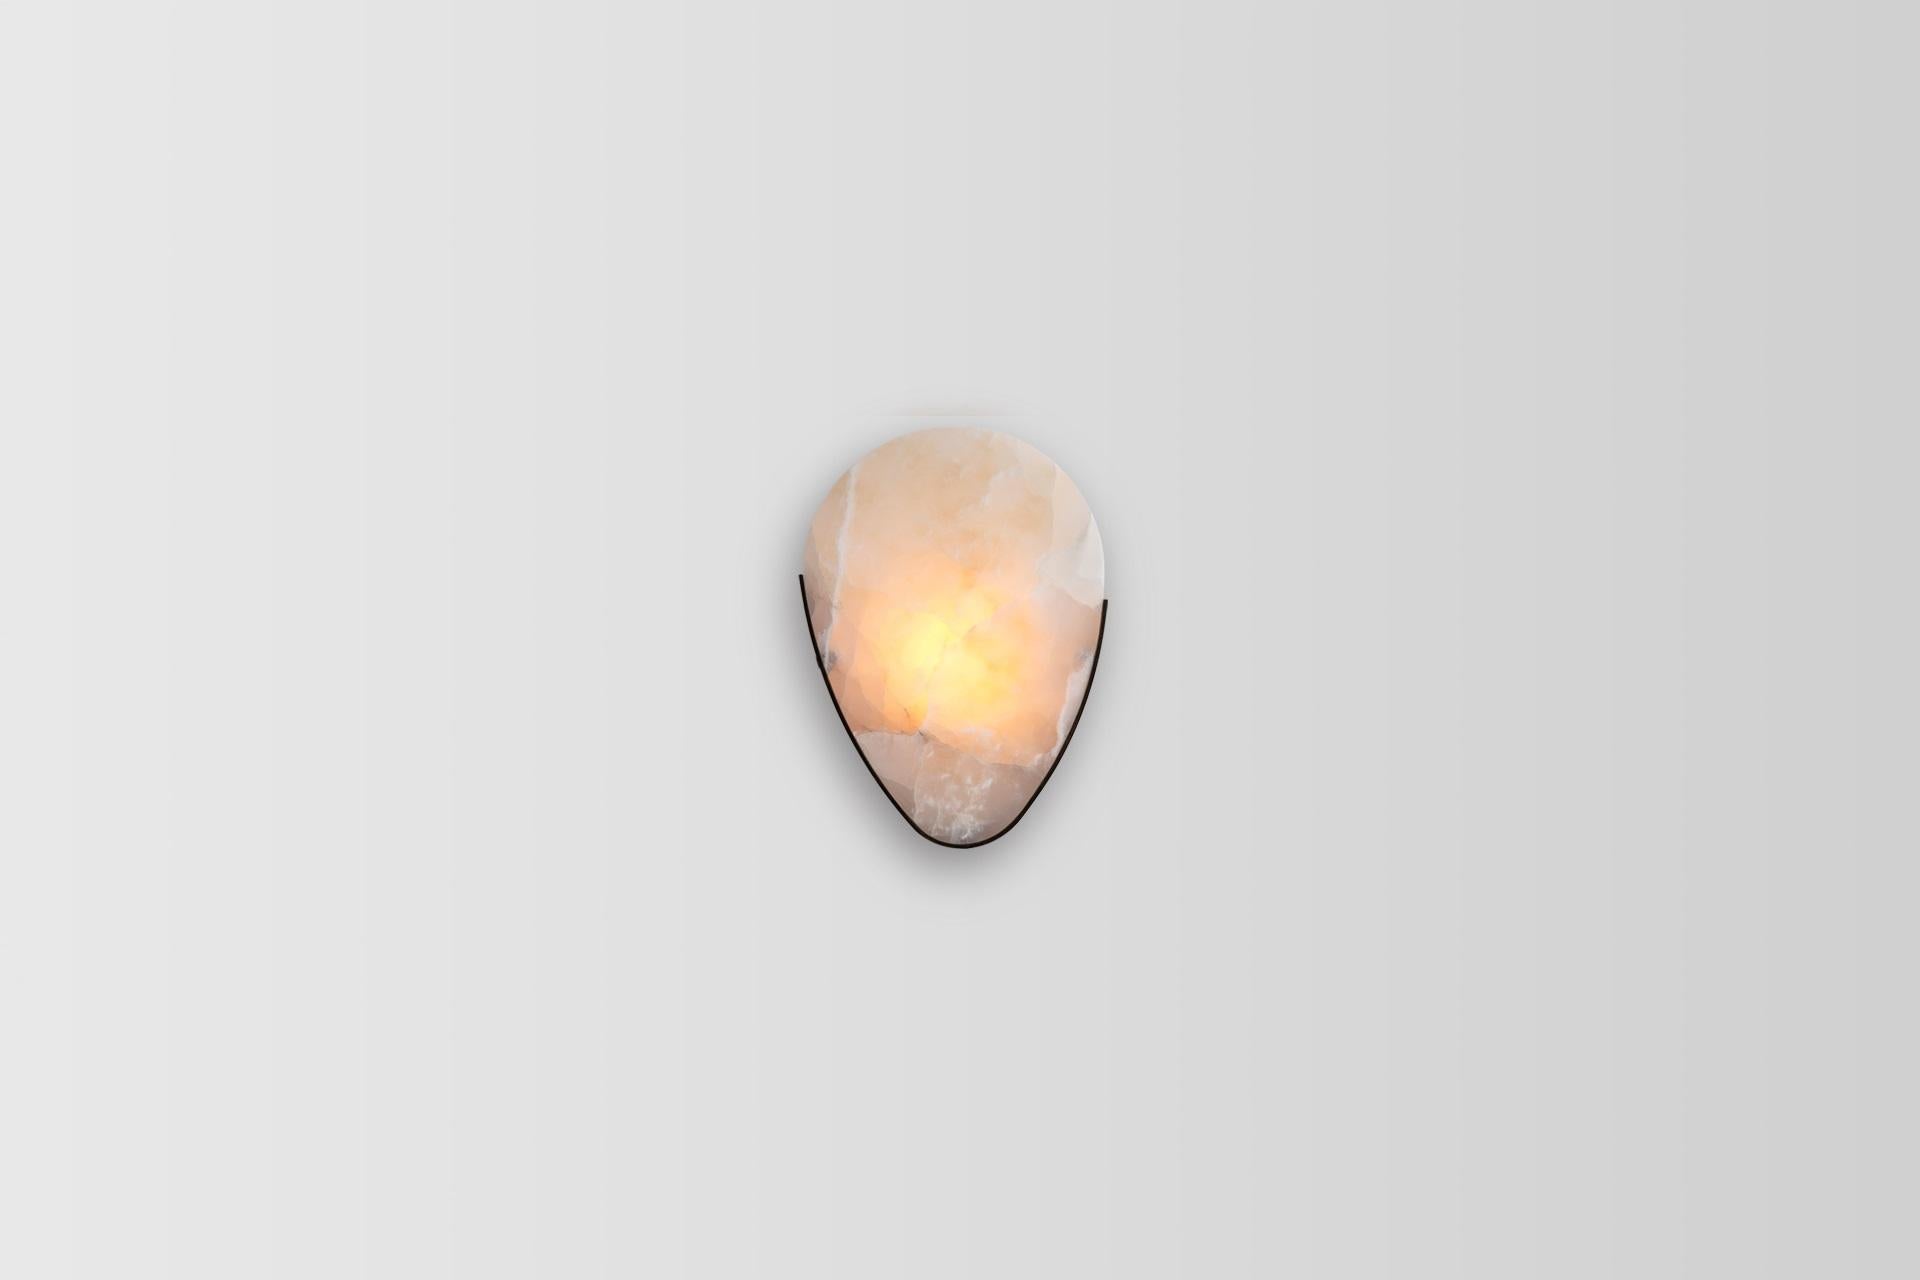 Teardrop marble wall lamp by Atra Design.
Dimensions: D 28 x W 15 x H 38 cm
Materials: Taj Mahal marble, brass

Atra Design
We are Atra, a furniture brand produced by Atra form a mexico city–based high end production facility that also houses